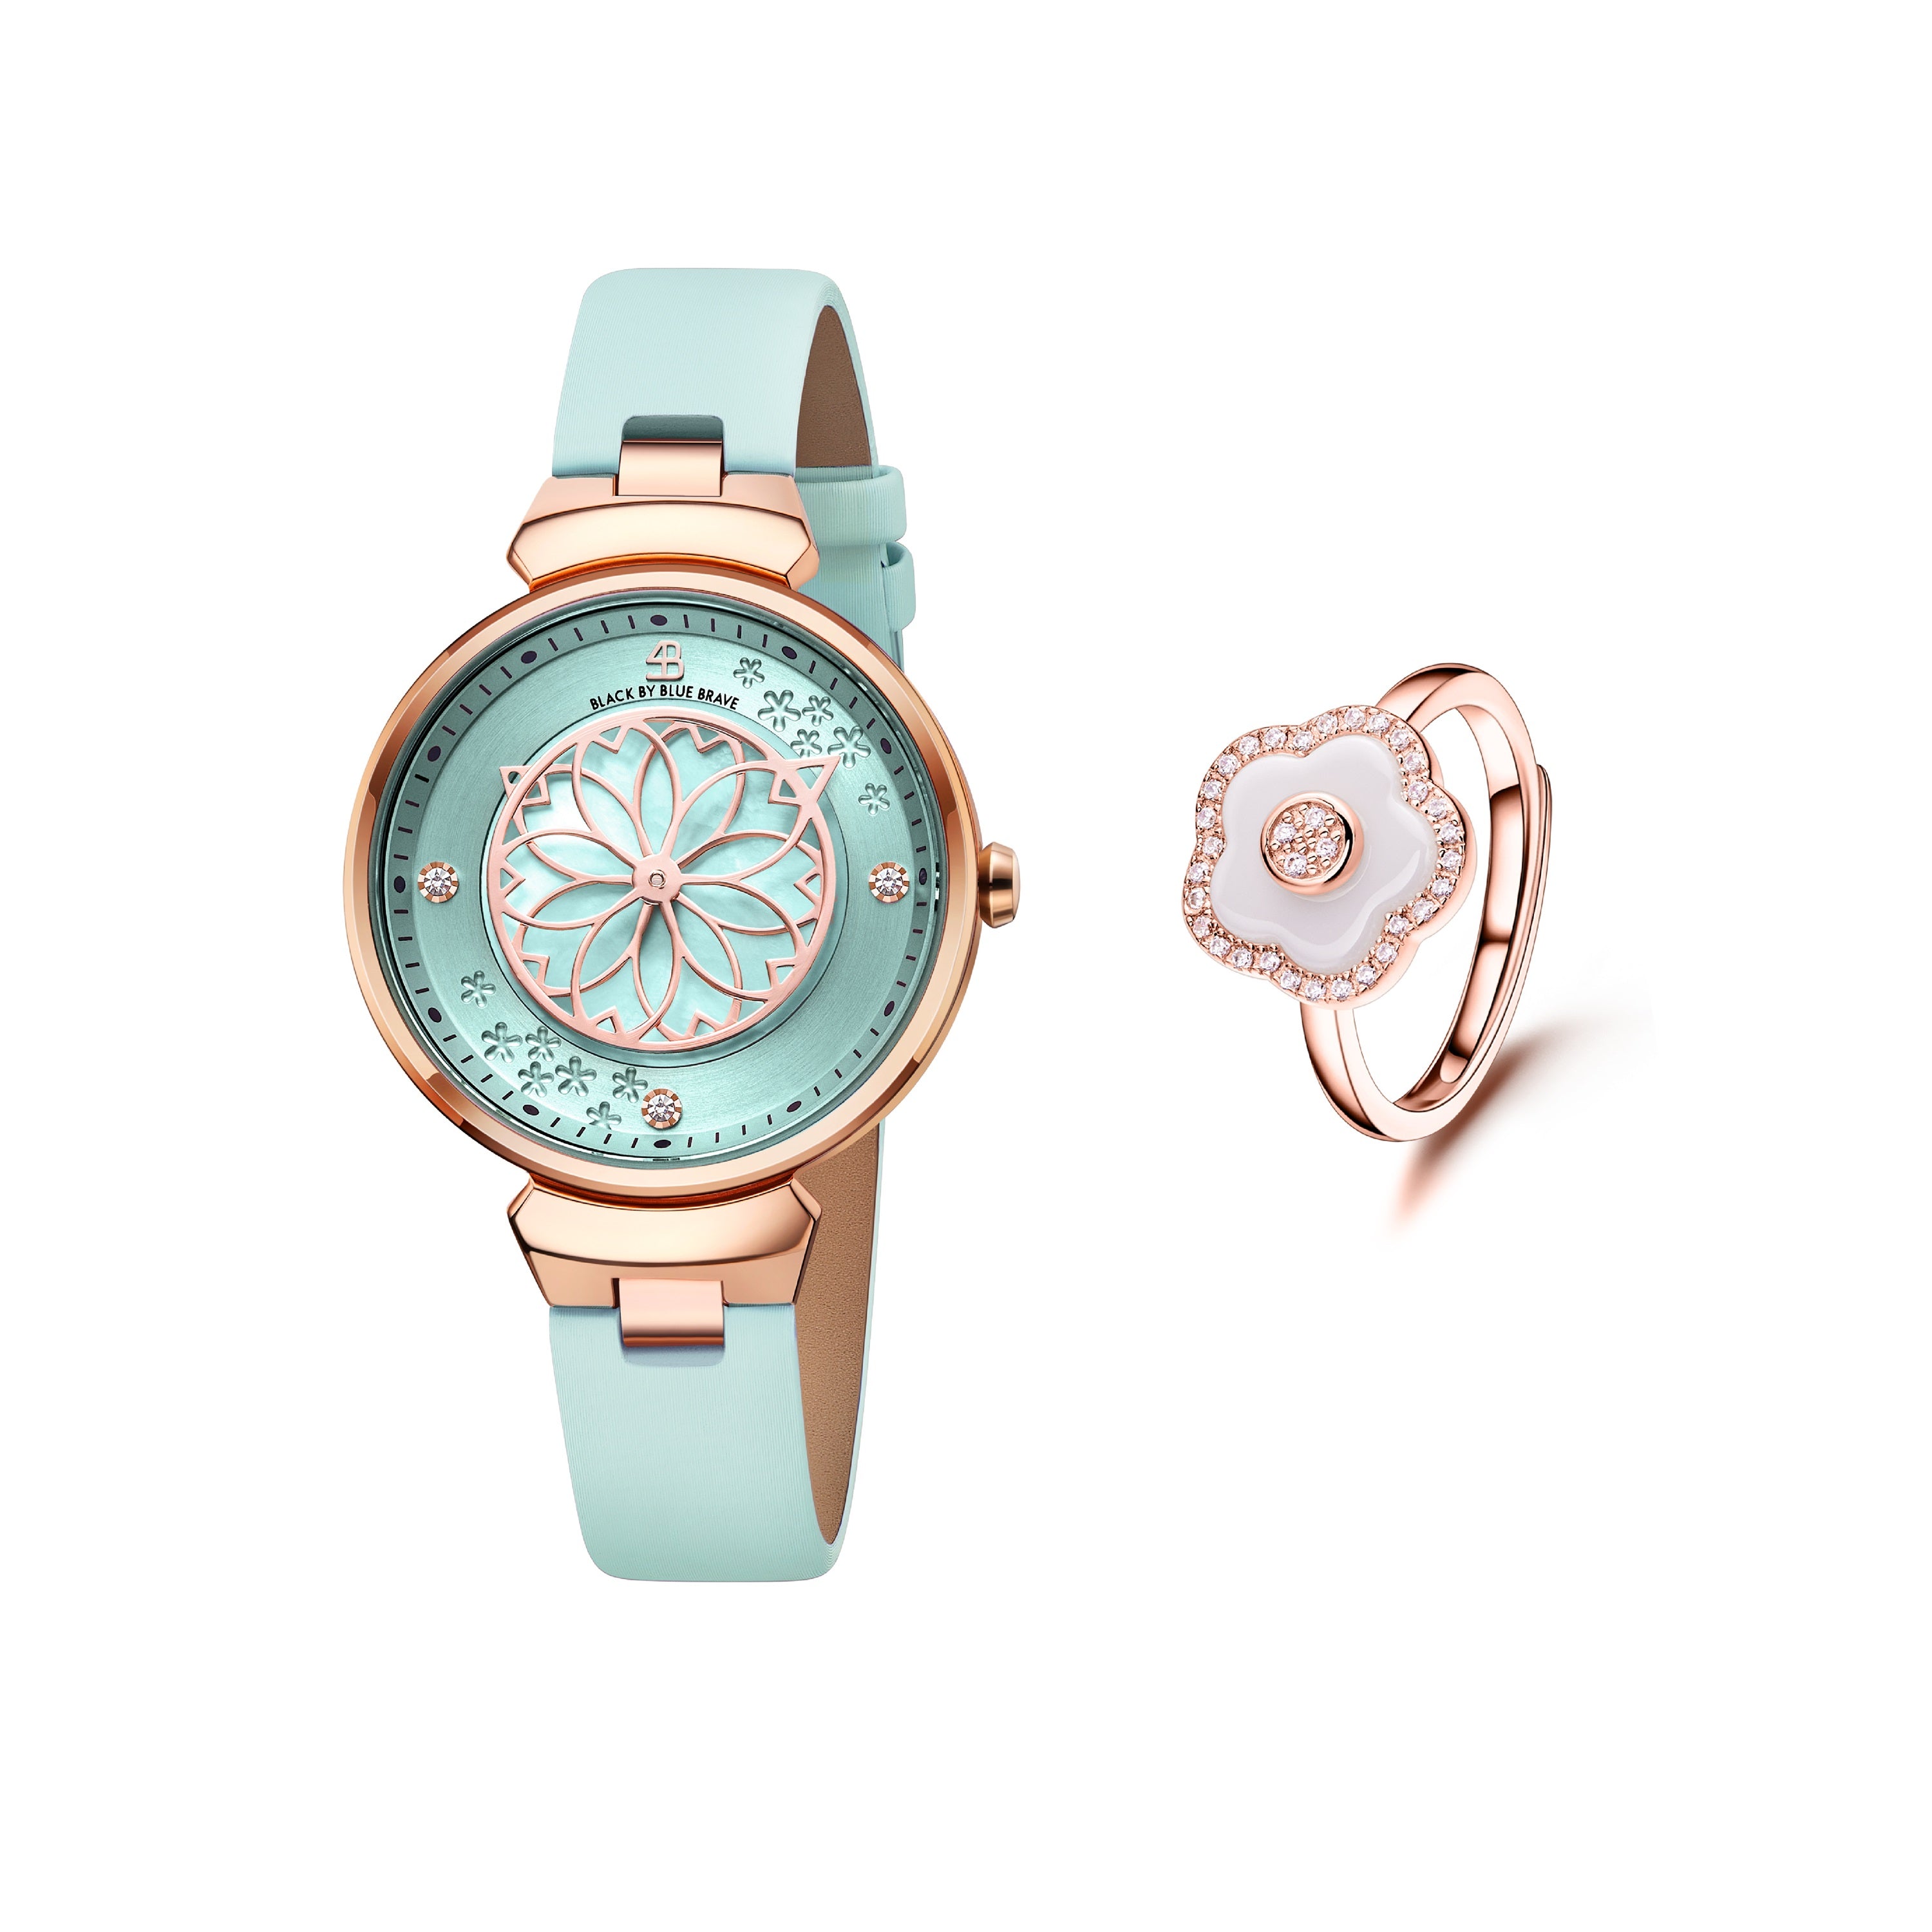 Blue Cherry Blossom Watch With Flower Ceramic Ring